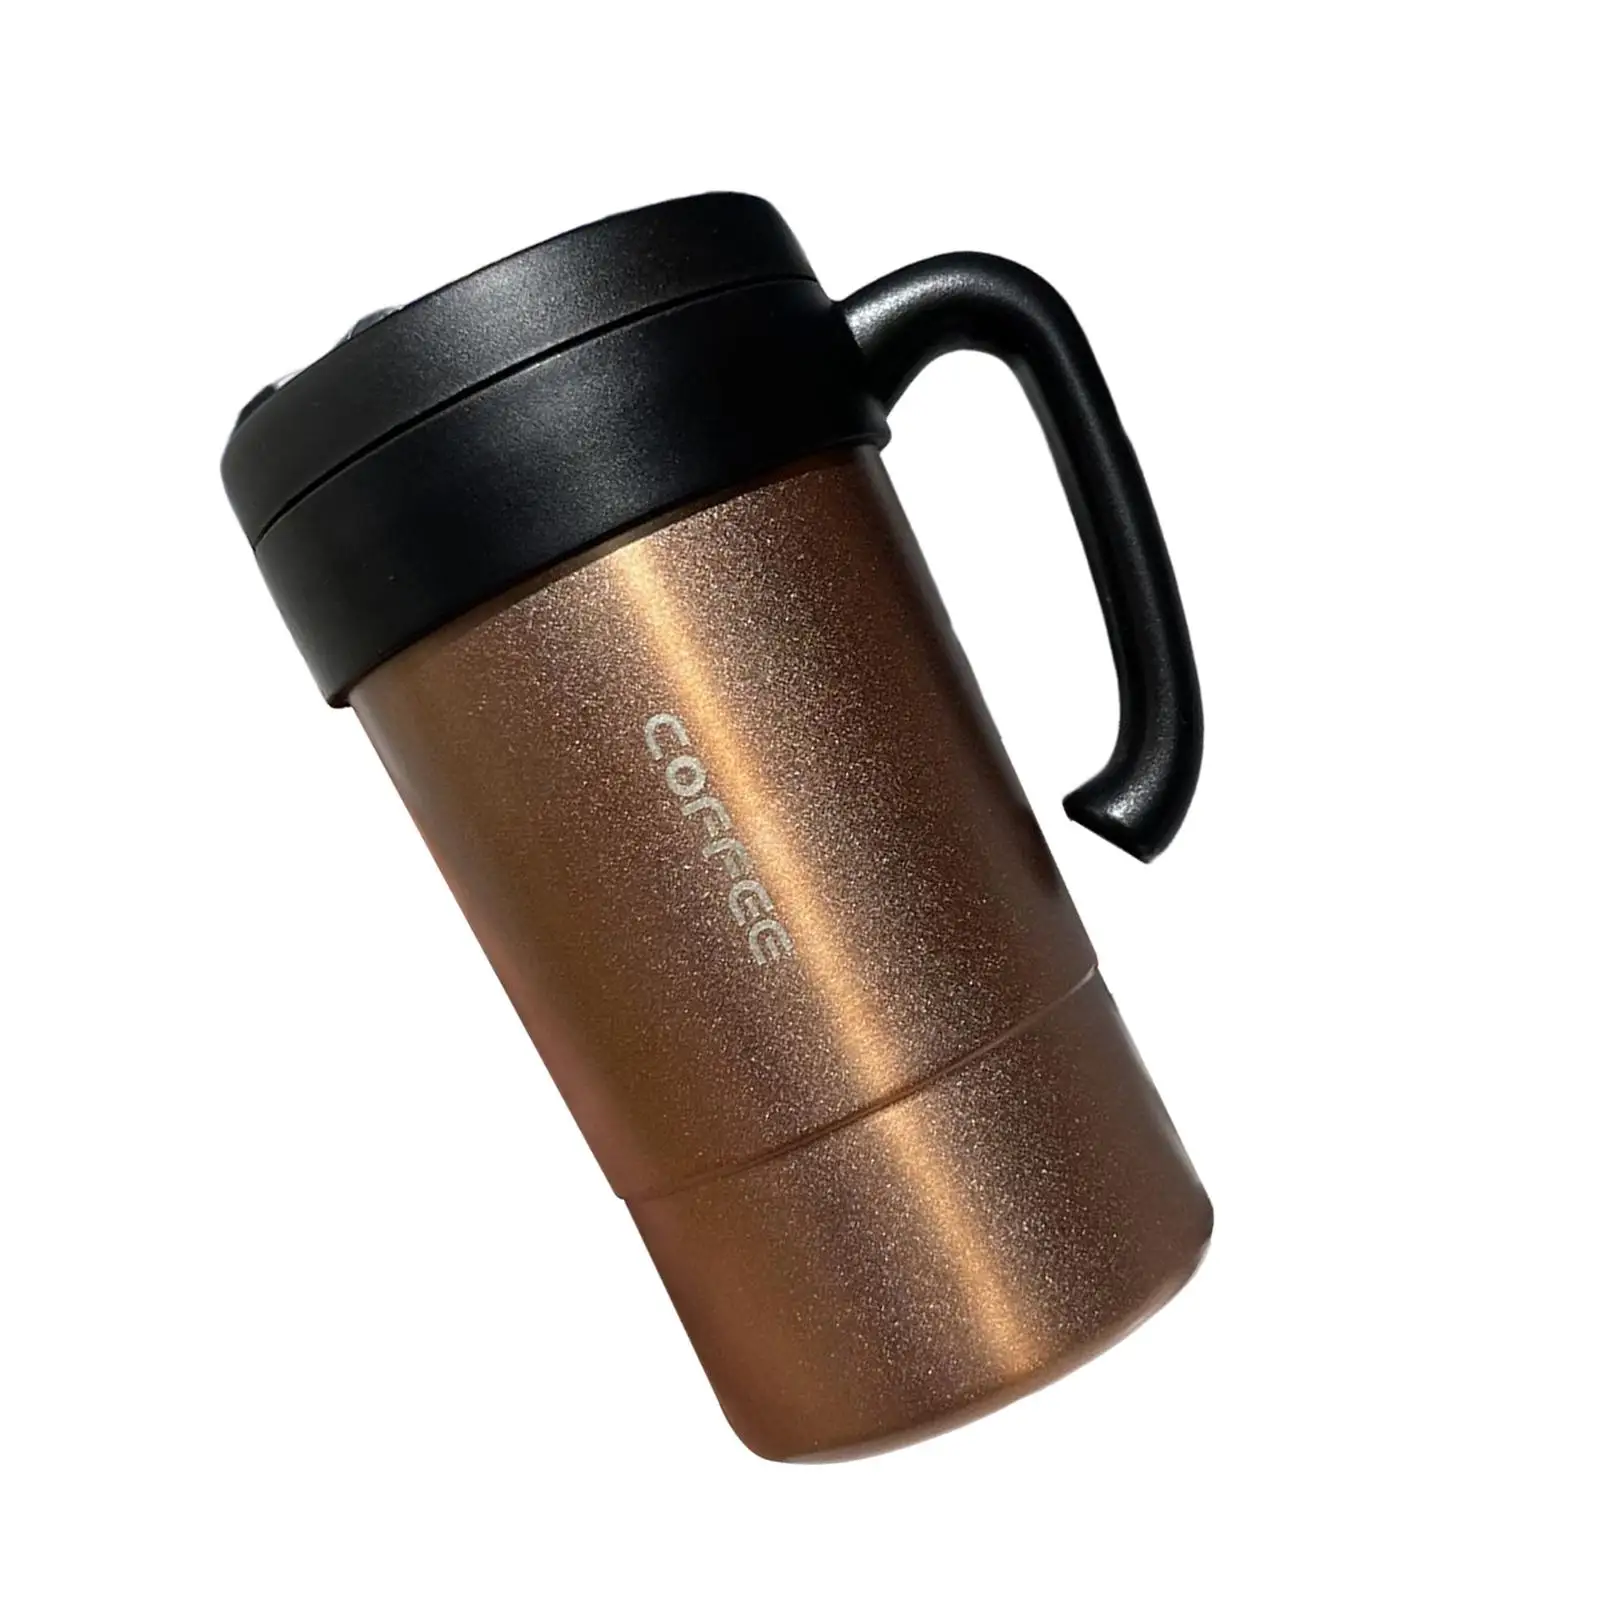 Insulated Thermal Mug Stainless Steel Multipurpose with Handle Practical Water Bottle Gifts Coffee Cups for Dorm Camping